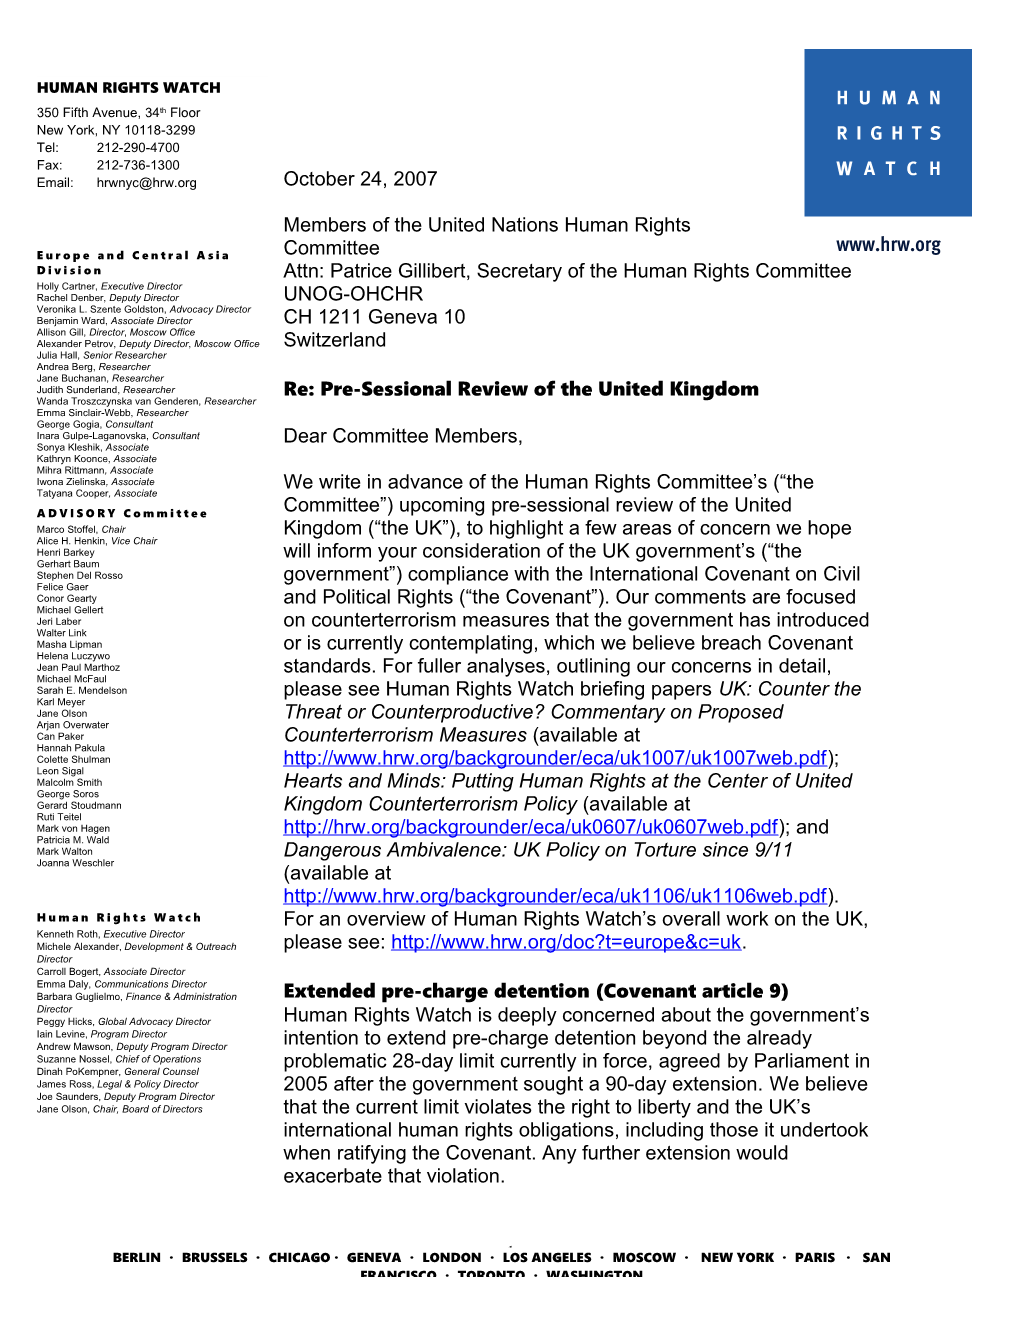 Members of the United Nations Human Rights Committee